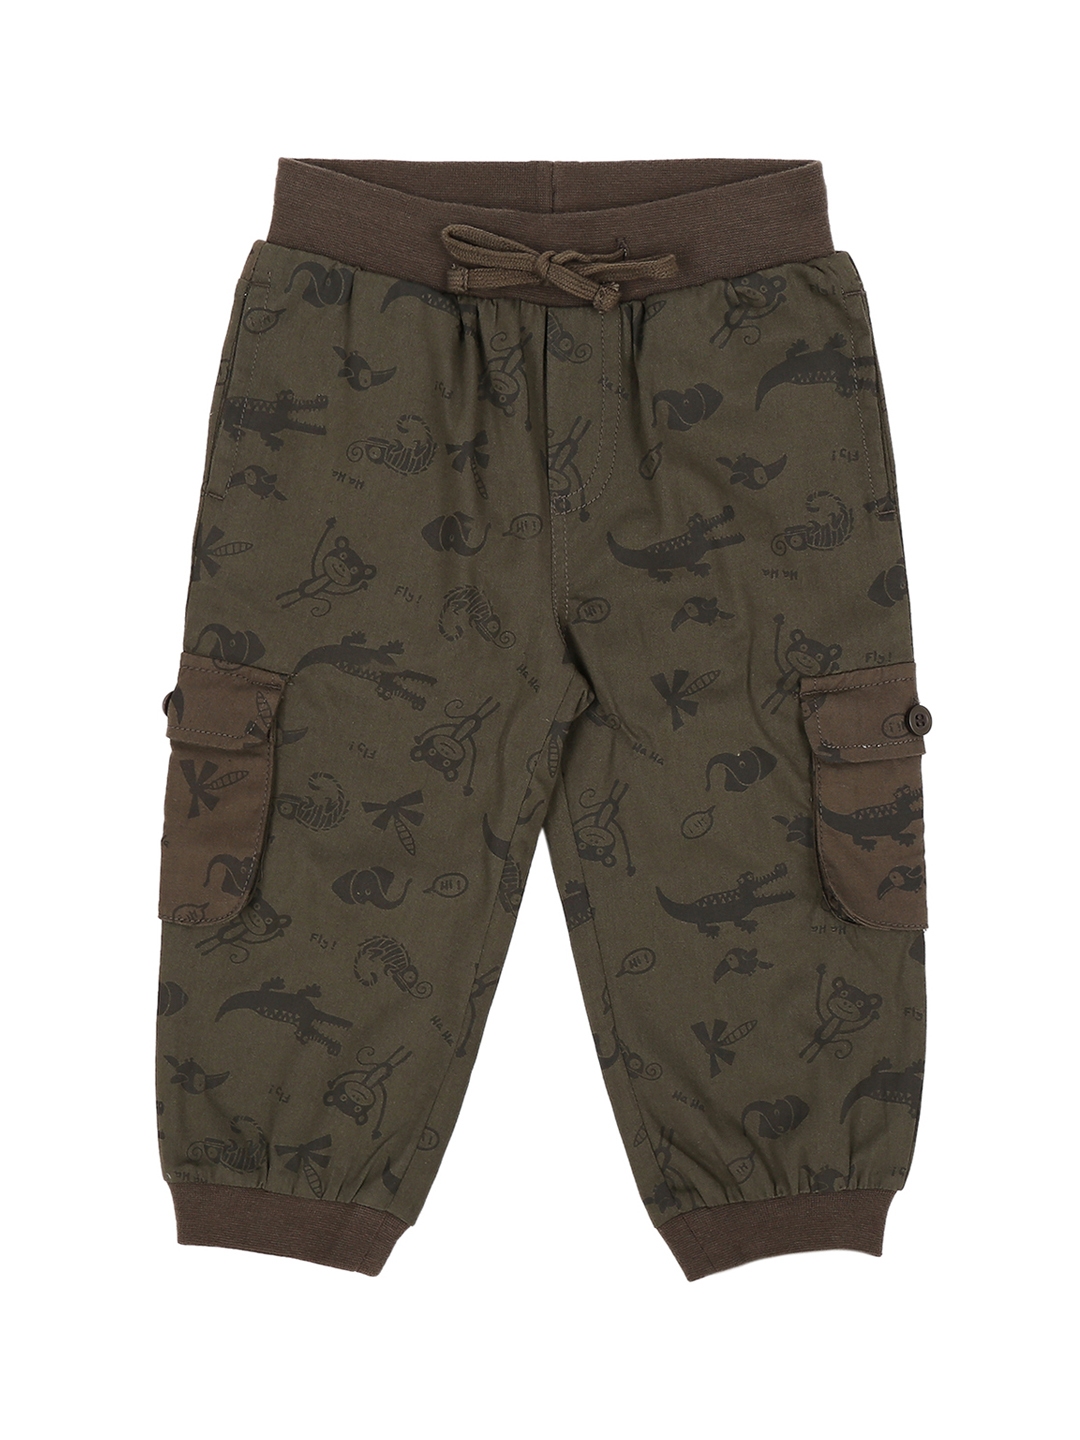 Buy Boys Cargo Trousers  Navy Online at Best Price  Mothercare India